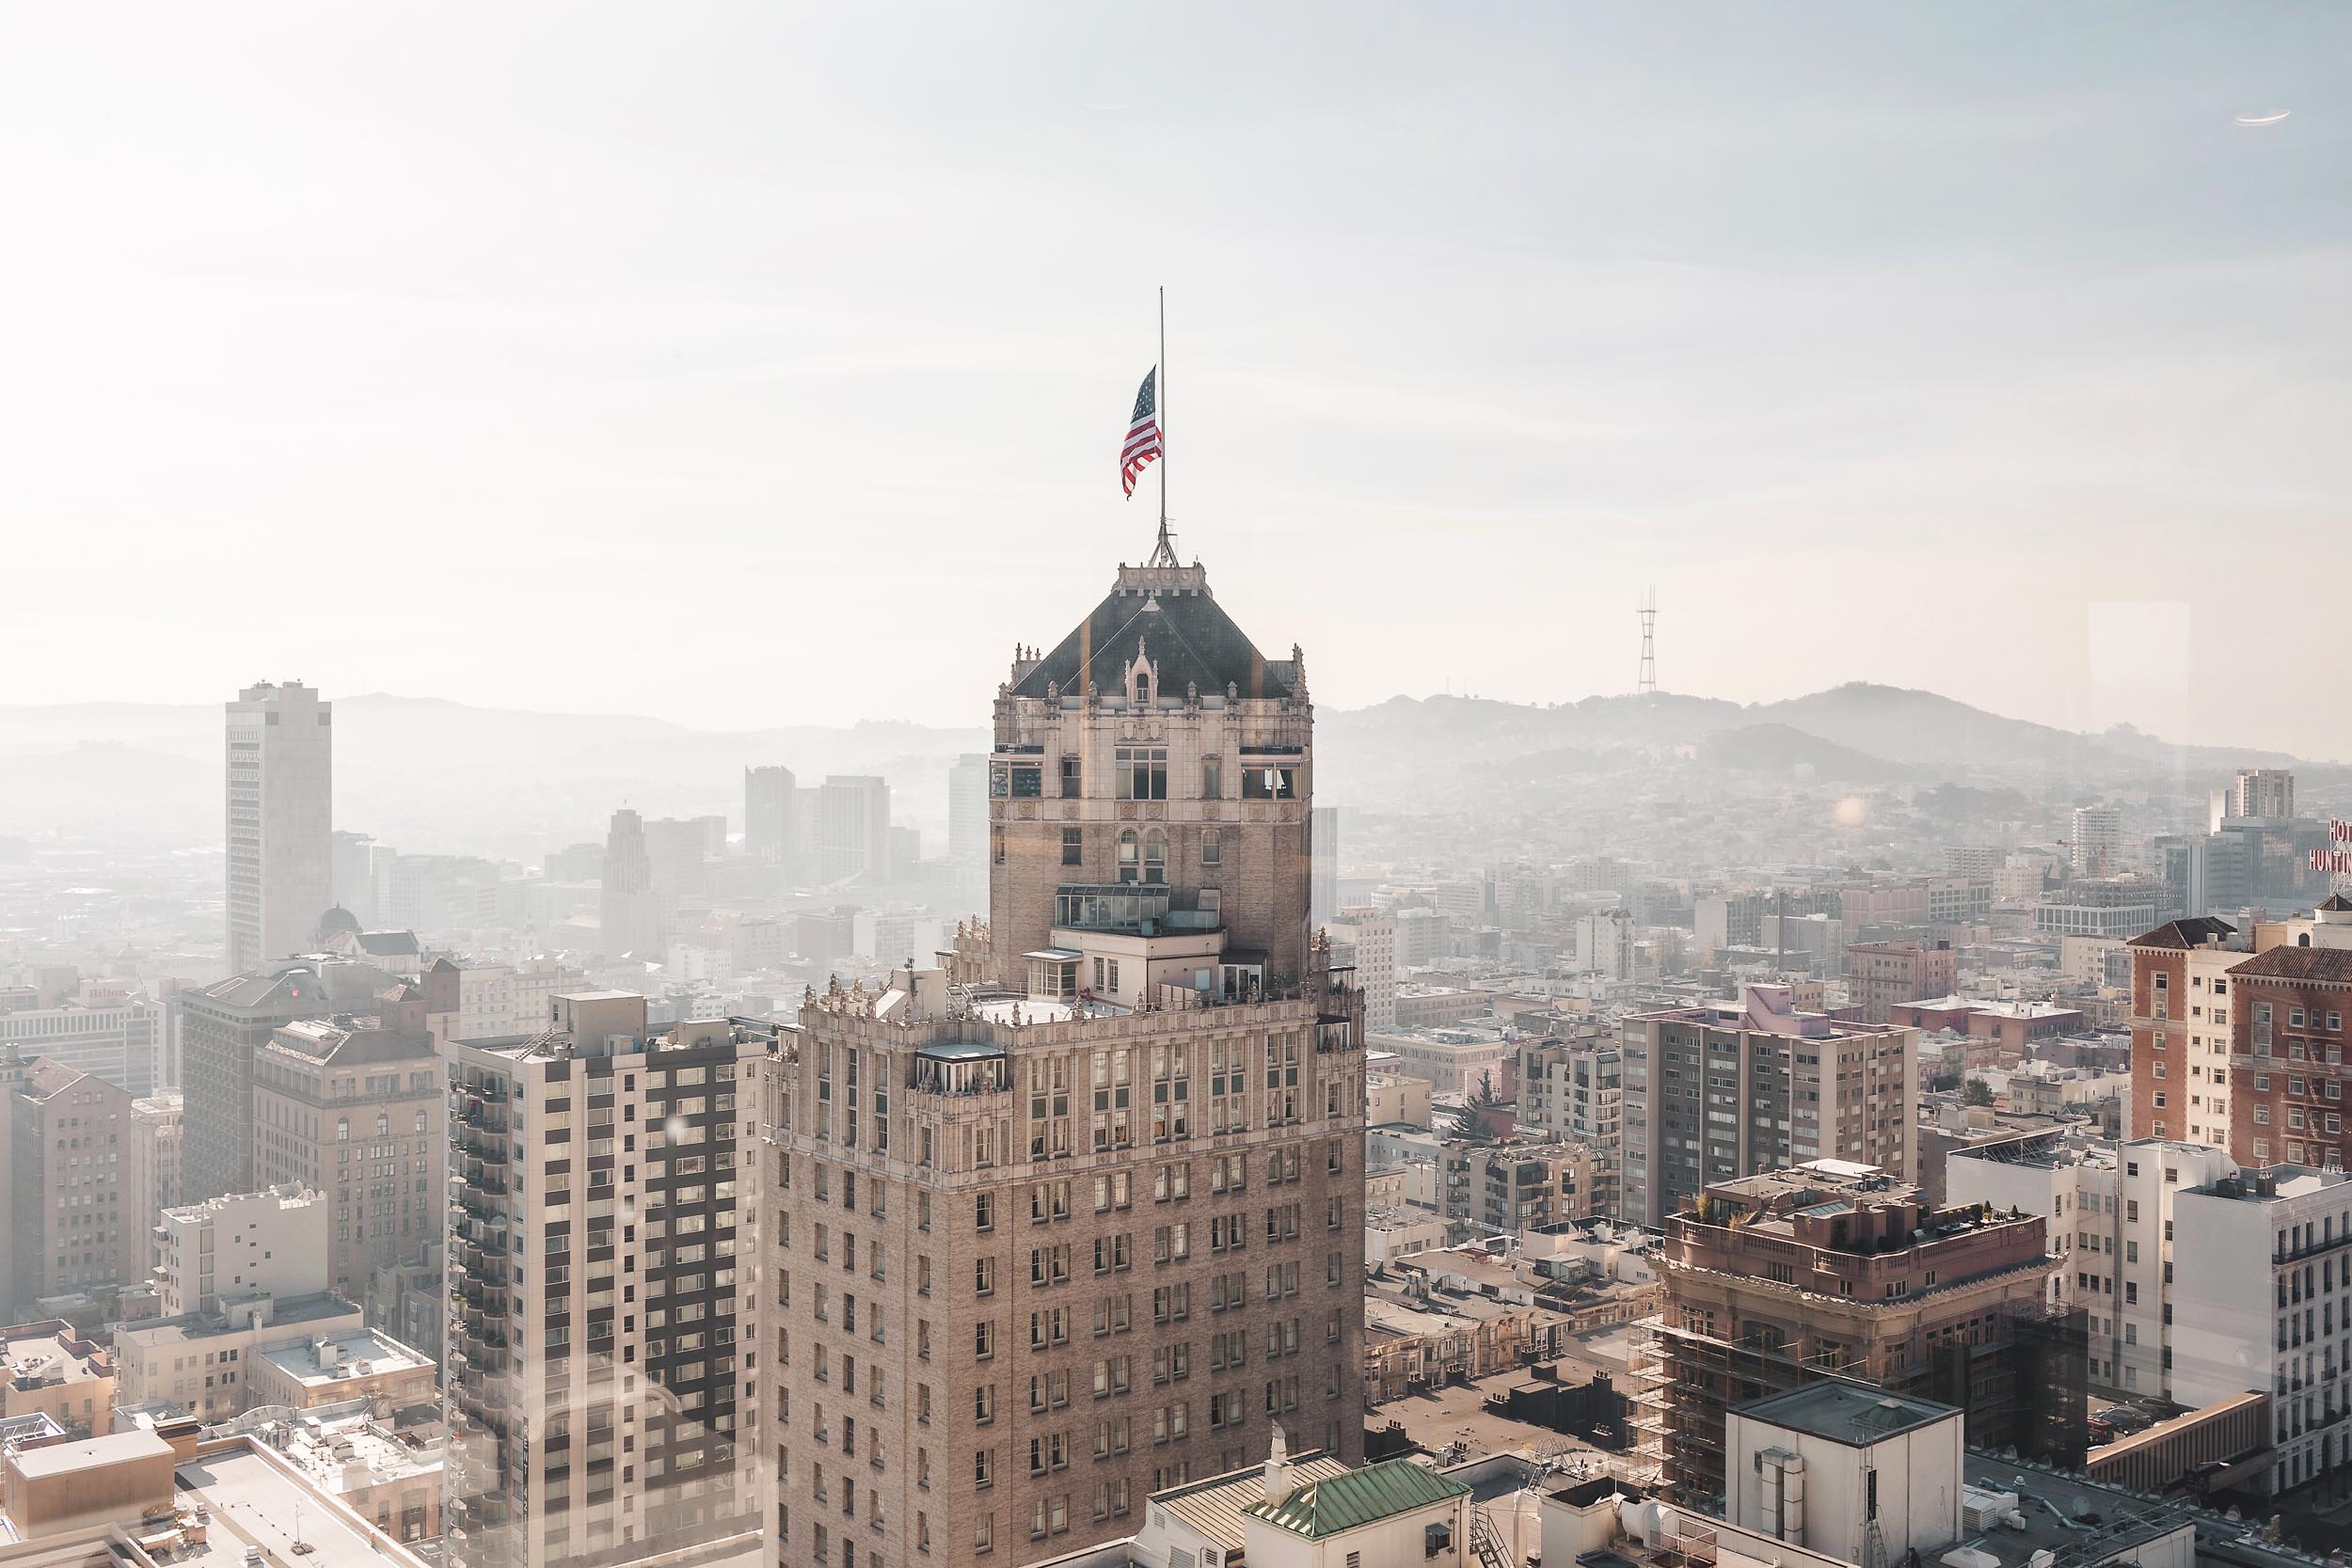 Jaw-dropping 270-degree views of San Francisco from the Fairmont San Francisco